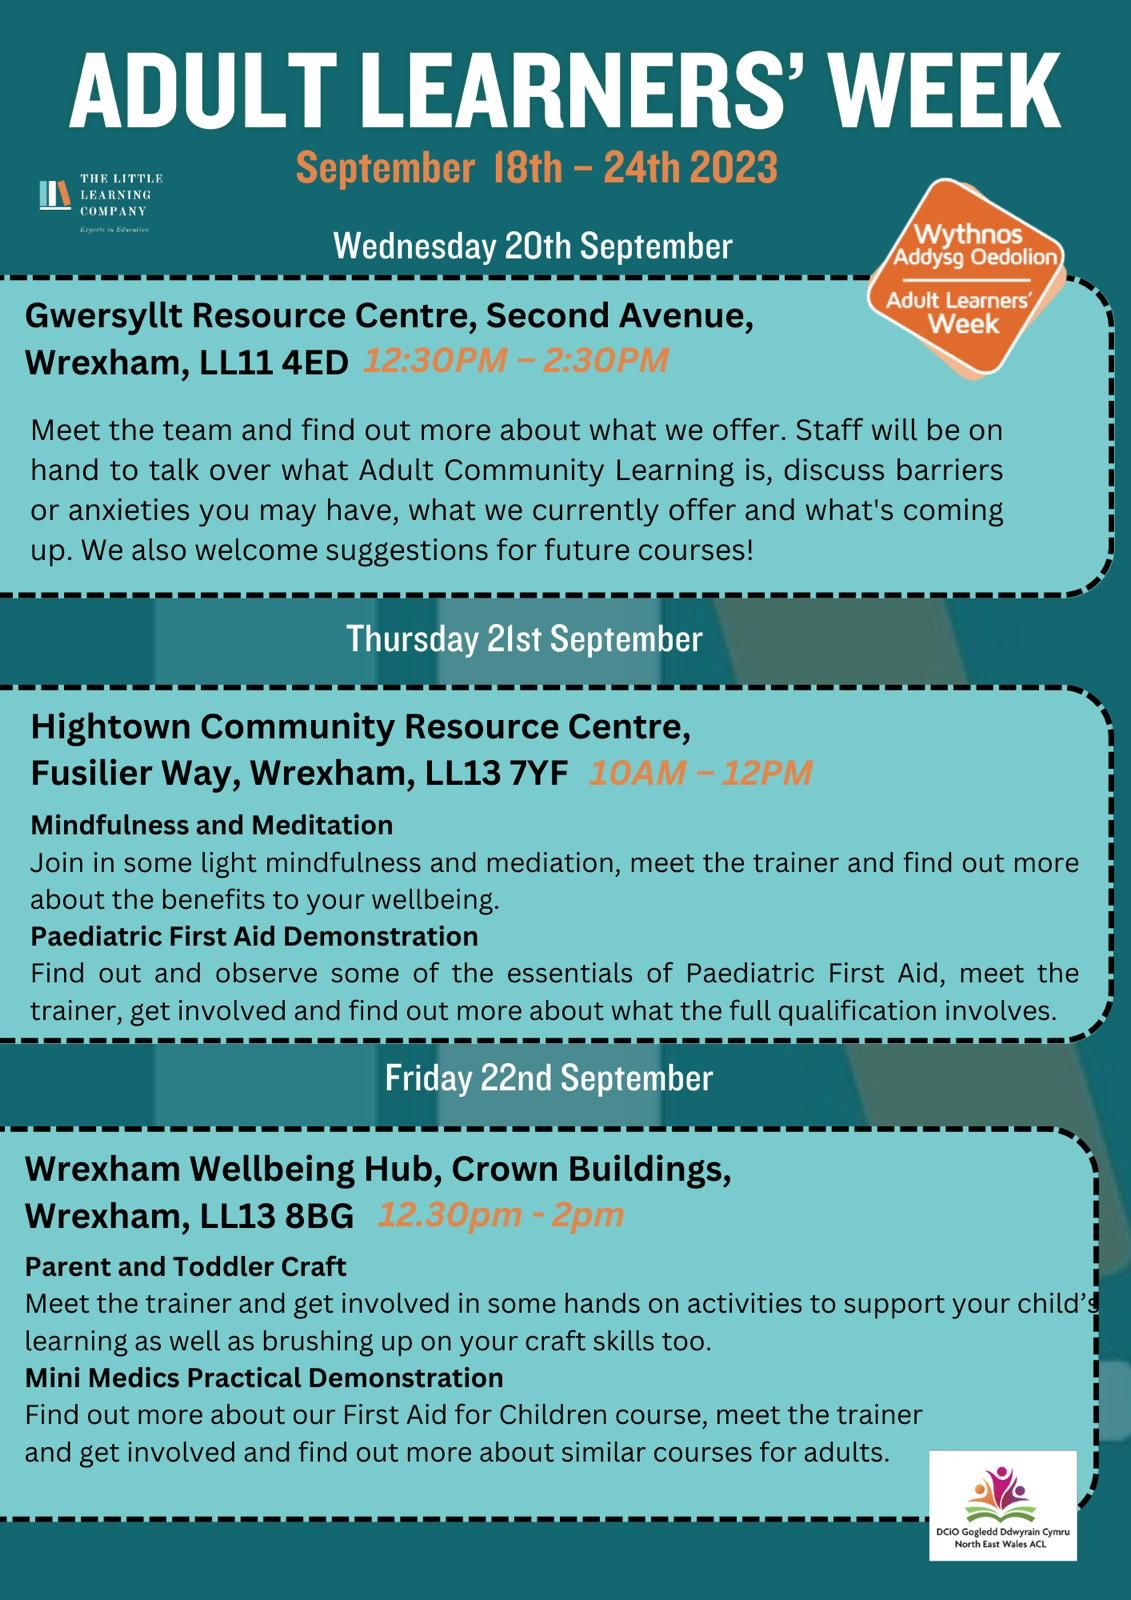 adult-learners-week-taster-sessions-in-wrexham